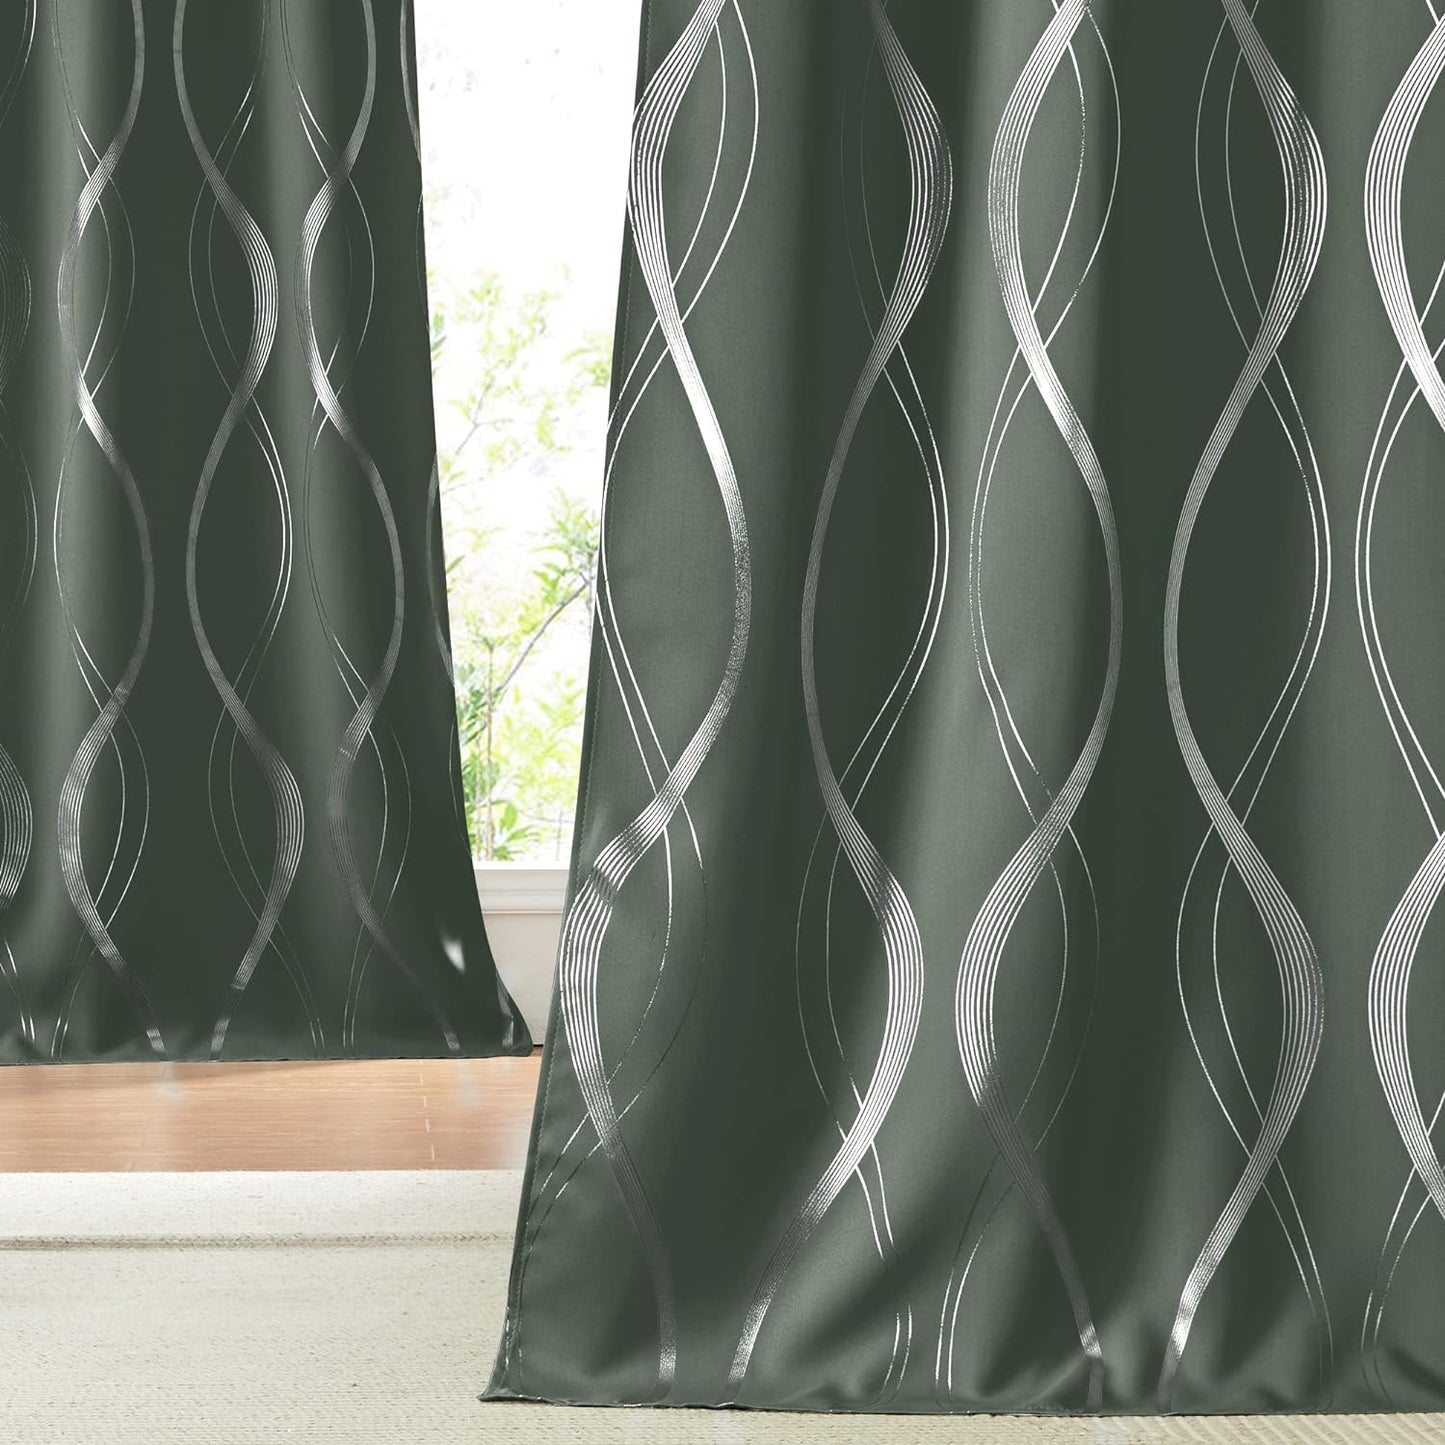 NICETOWN Grey Blackout Curtains 84 Inch Length 2 Panels Set for Bedroom/Living Room, Noise Reducing Thermal Insulated Wave Line Foil Print Drapes for Patio Sliding Glass Door (52 X 84, Gray)  NICETOWN Dark Mallard 52"W X 84"L 